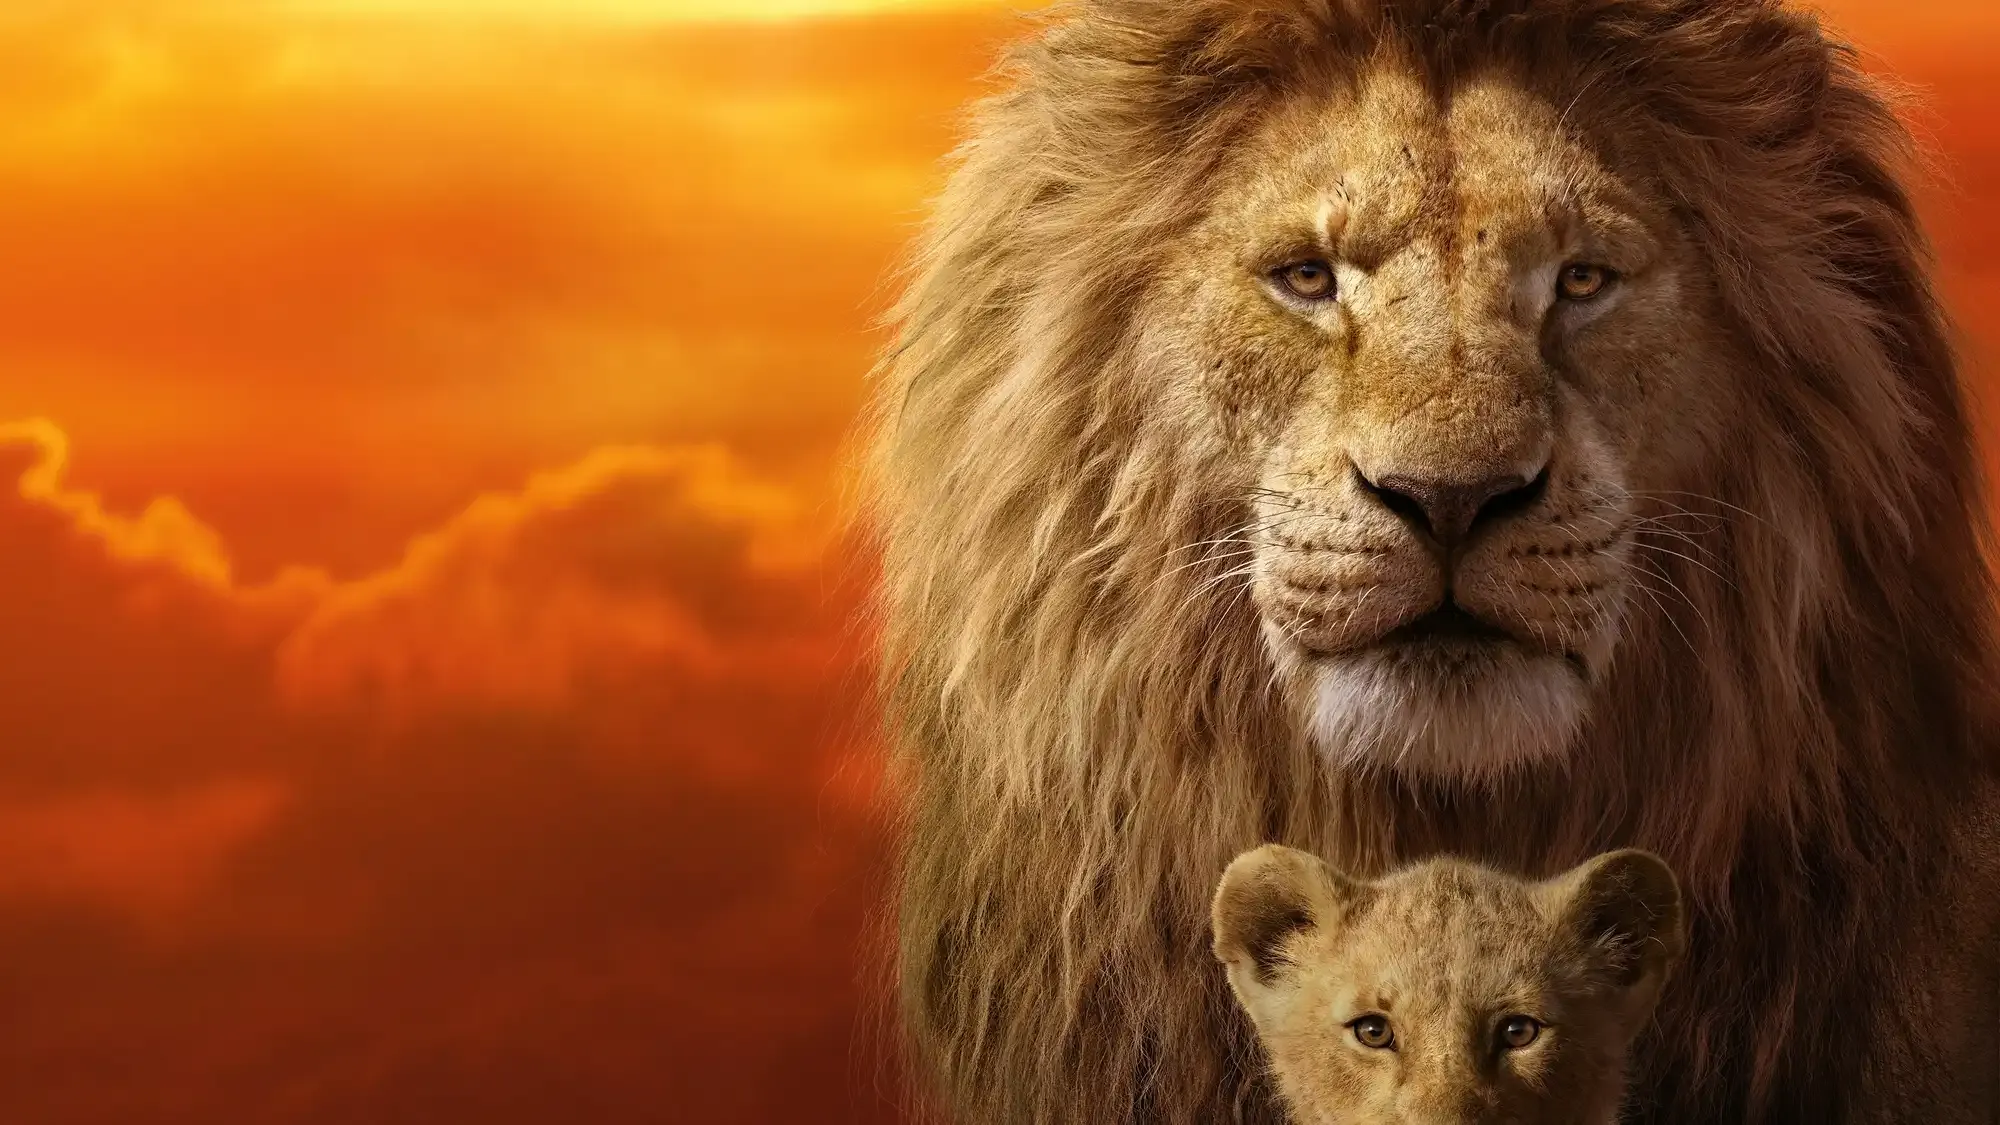 The Lion King movie review